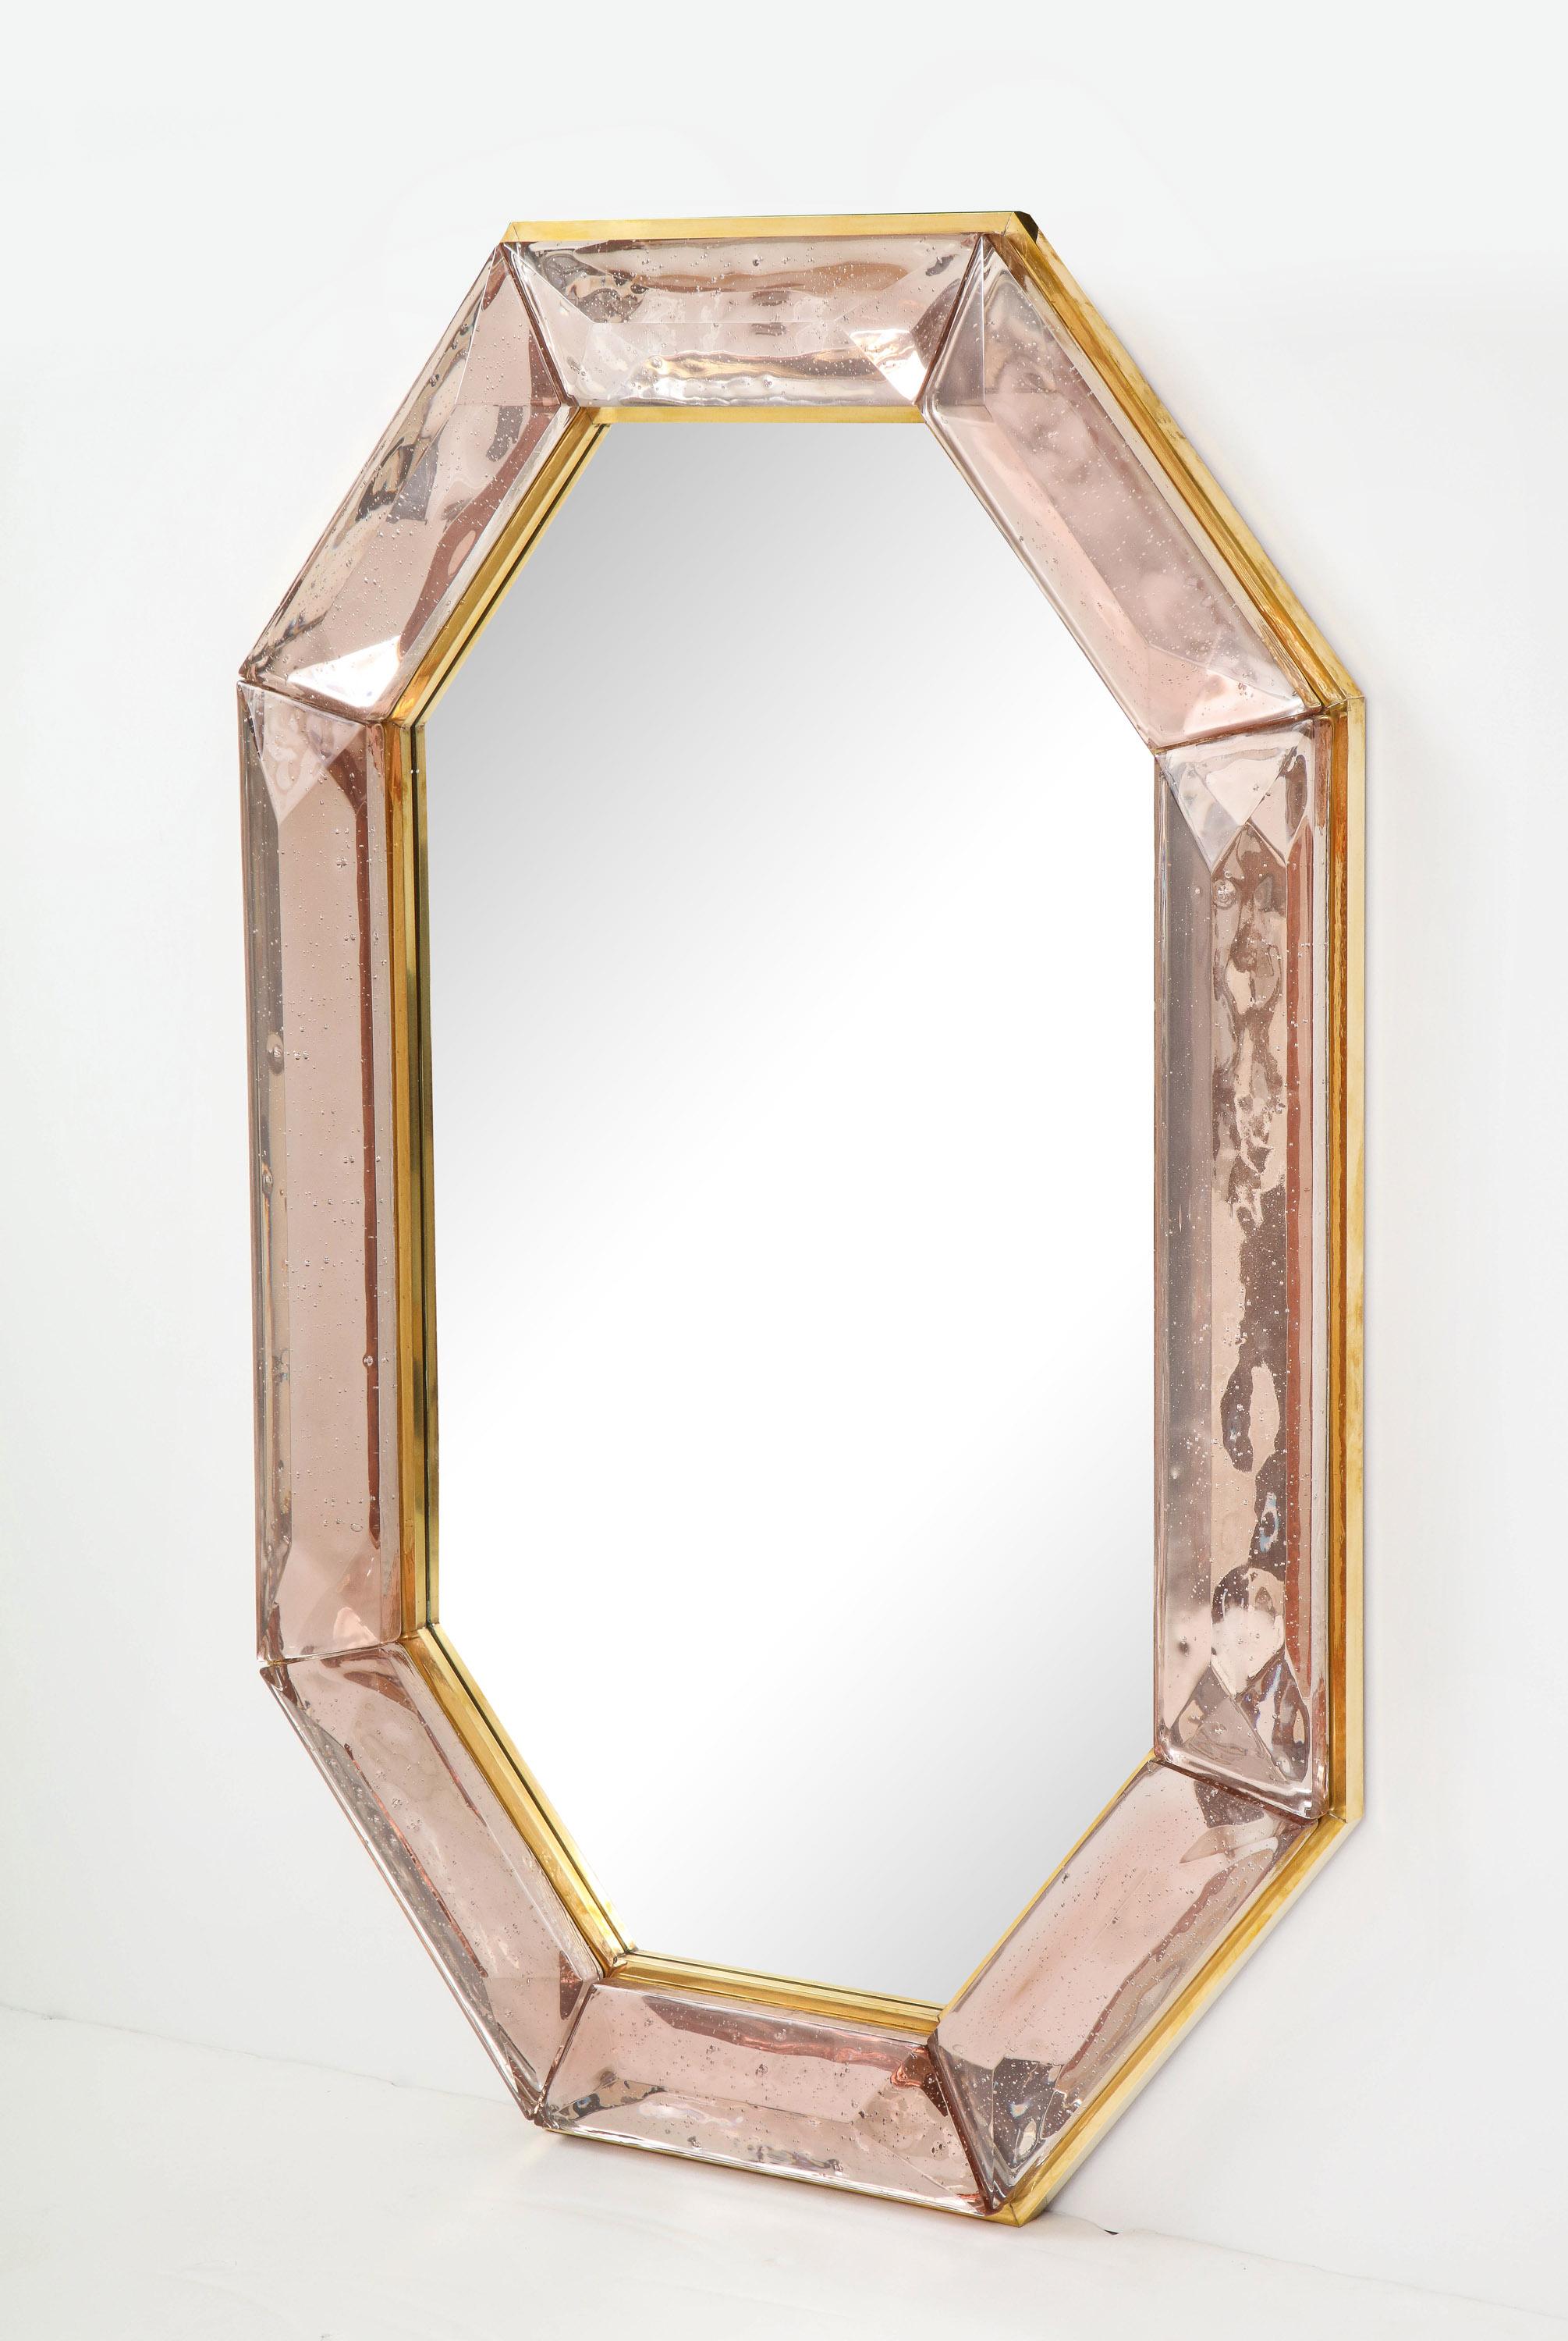 Bespoke octagon pink Murano glass mirror, in stock
Vivid and intense pink glass block with naturally occurring air inclusions throughout
Highly polished faceted pattern
Brass gallery all around
Each mirror is a unique luxury handcrafted by a